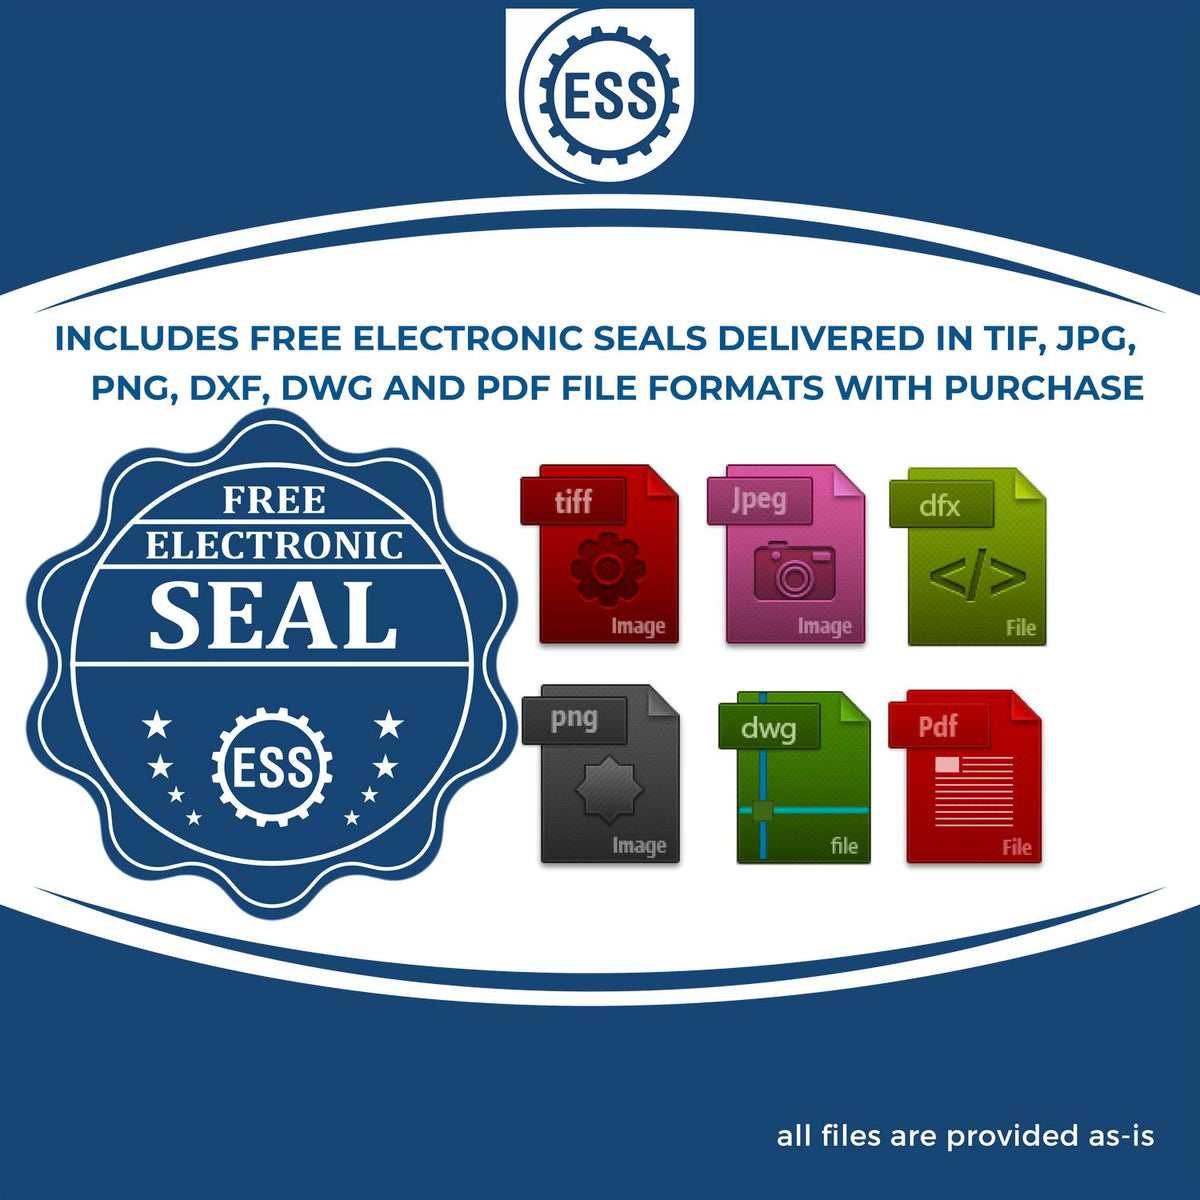 An infographic for the free electronic seal for the PSI Missouri Notary Stamp illustrating the different file type icons such as DXF, DWG, TIF, JPG and PNG.